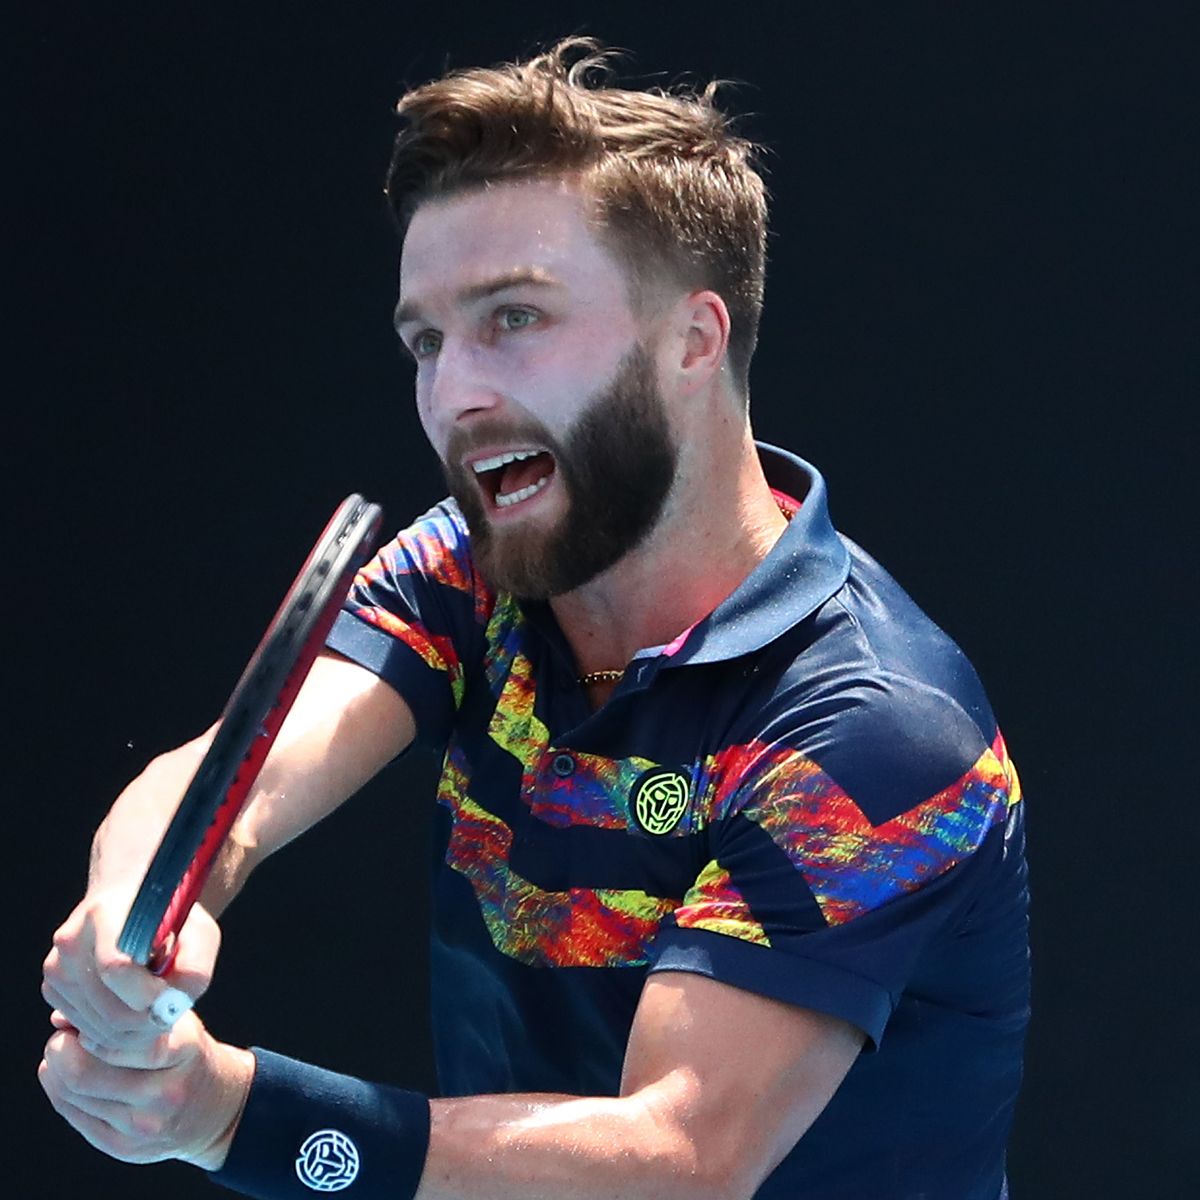 Indian Wells Masters 2022: Liam Broady defeats Ramkumar Ramanathan 2-1 in the Qualifiers